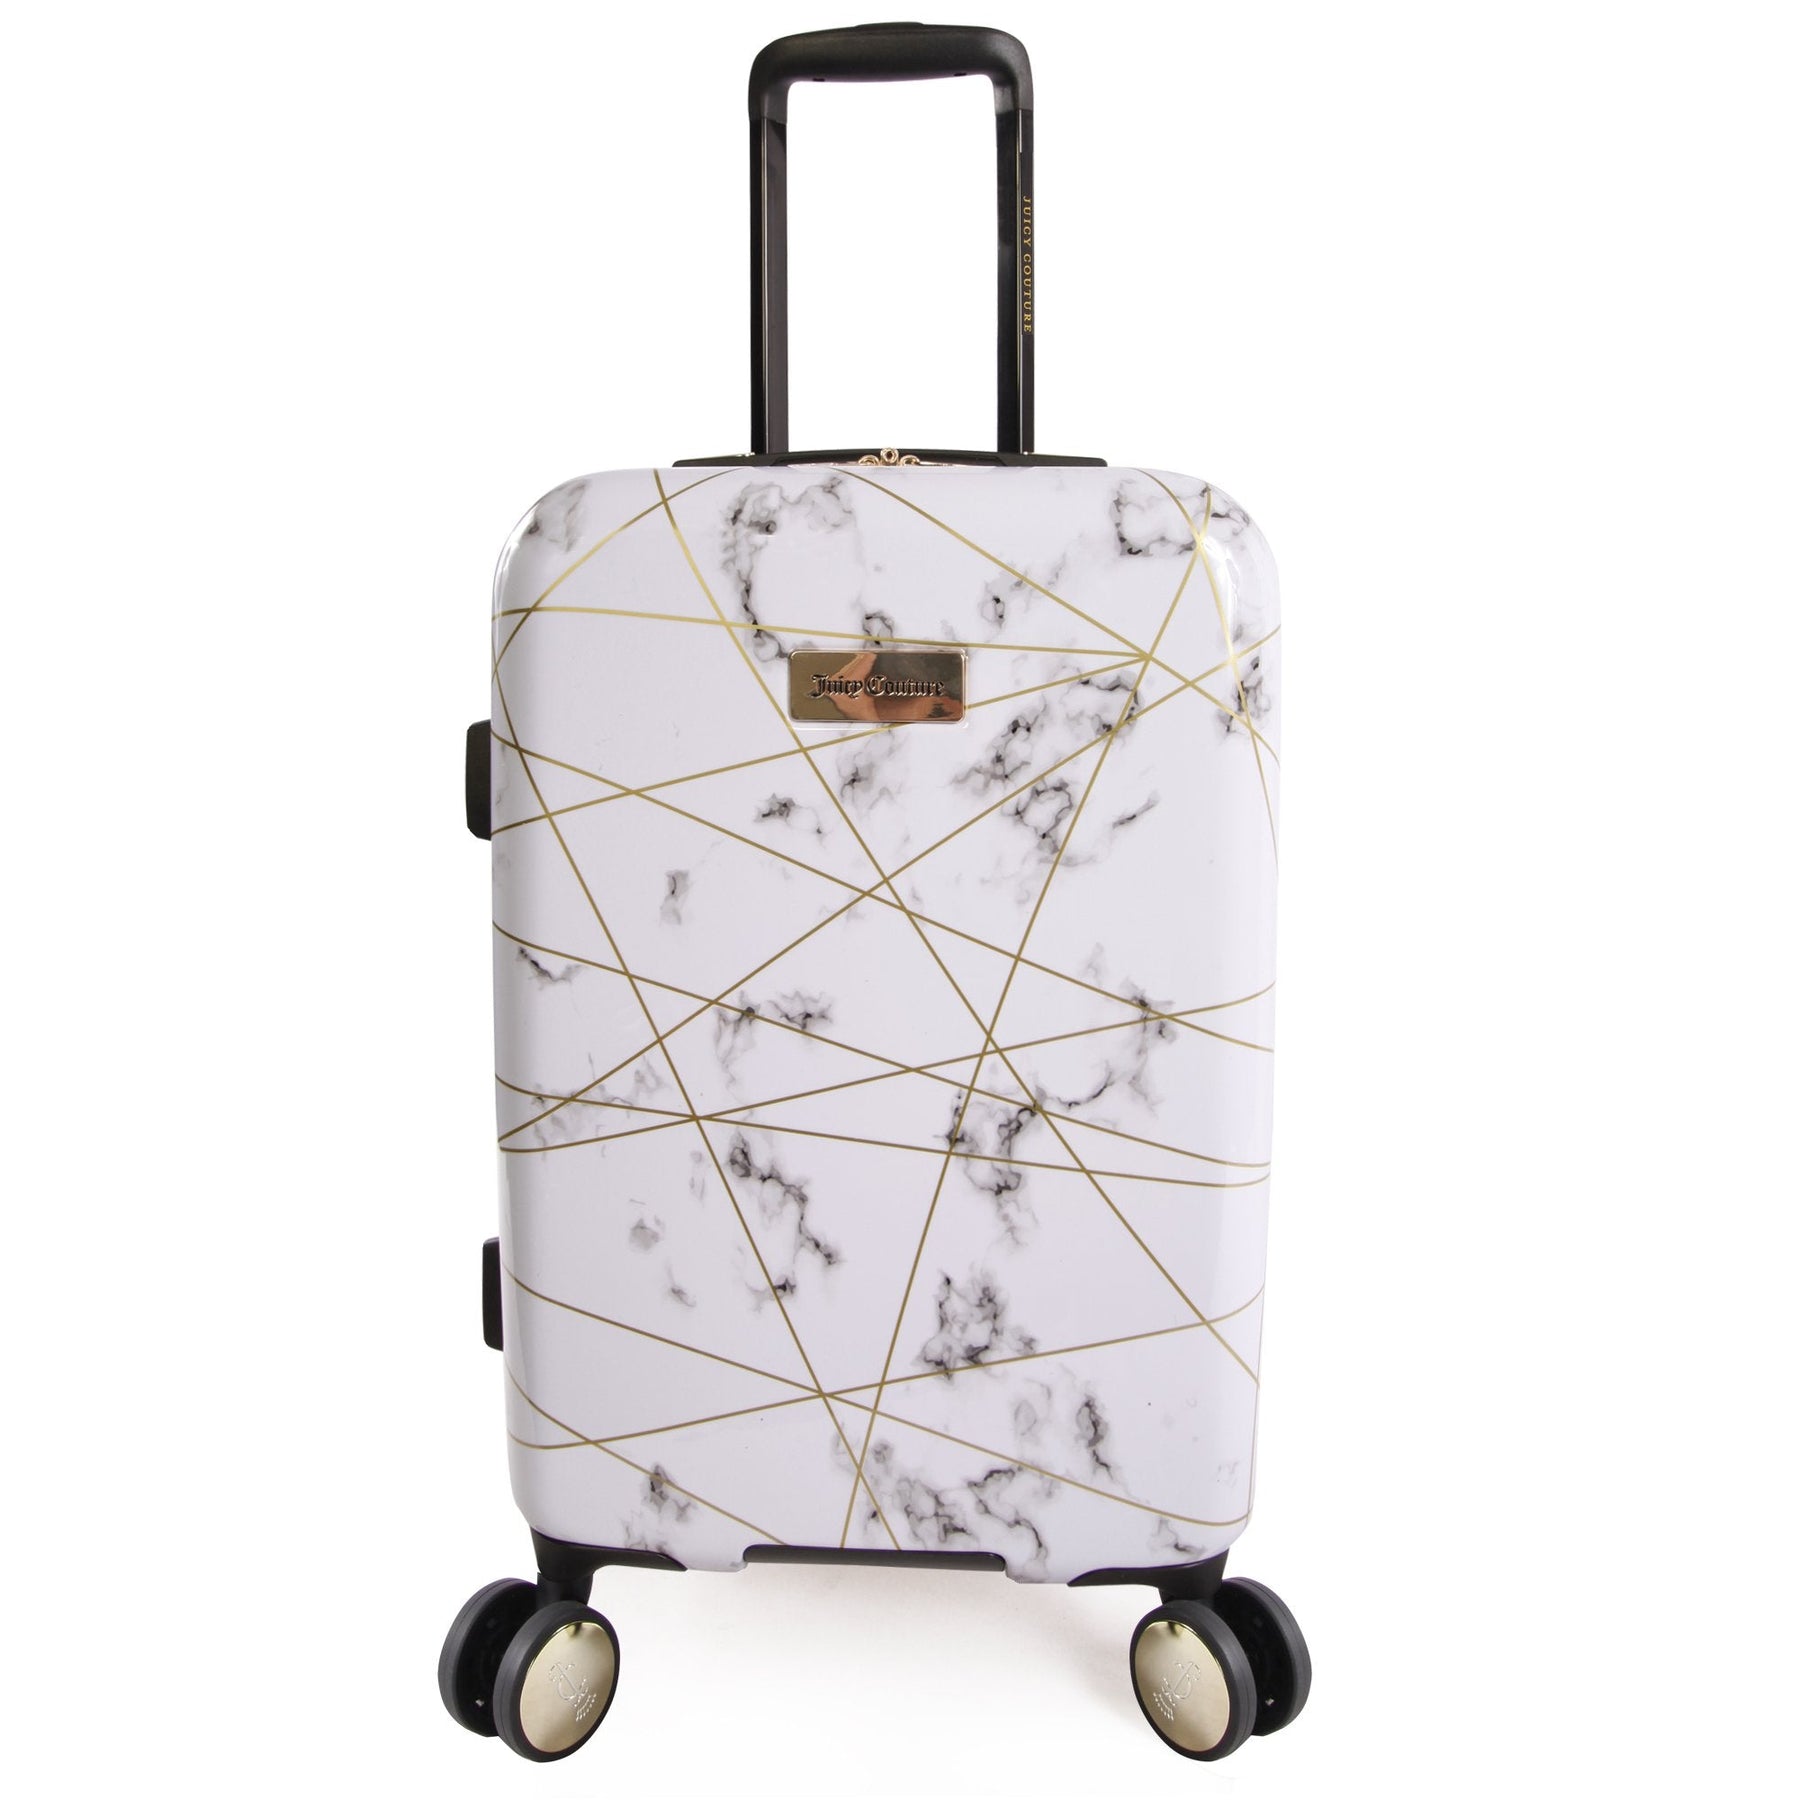 Juicy Couture Carry-On Hardside Spinner Luggage Marble Web